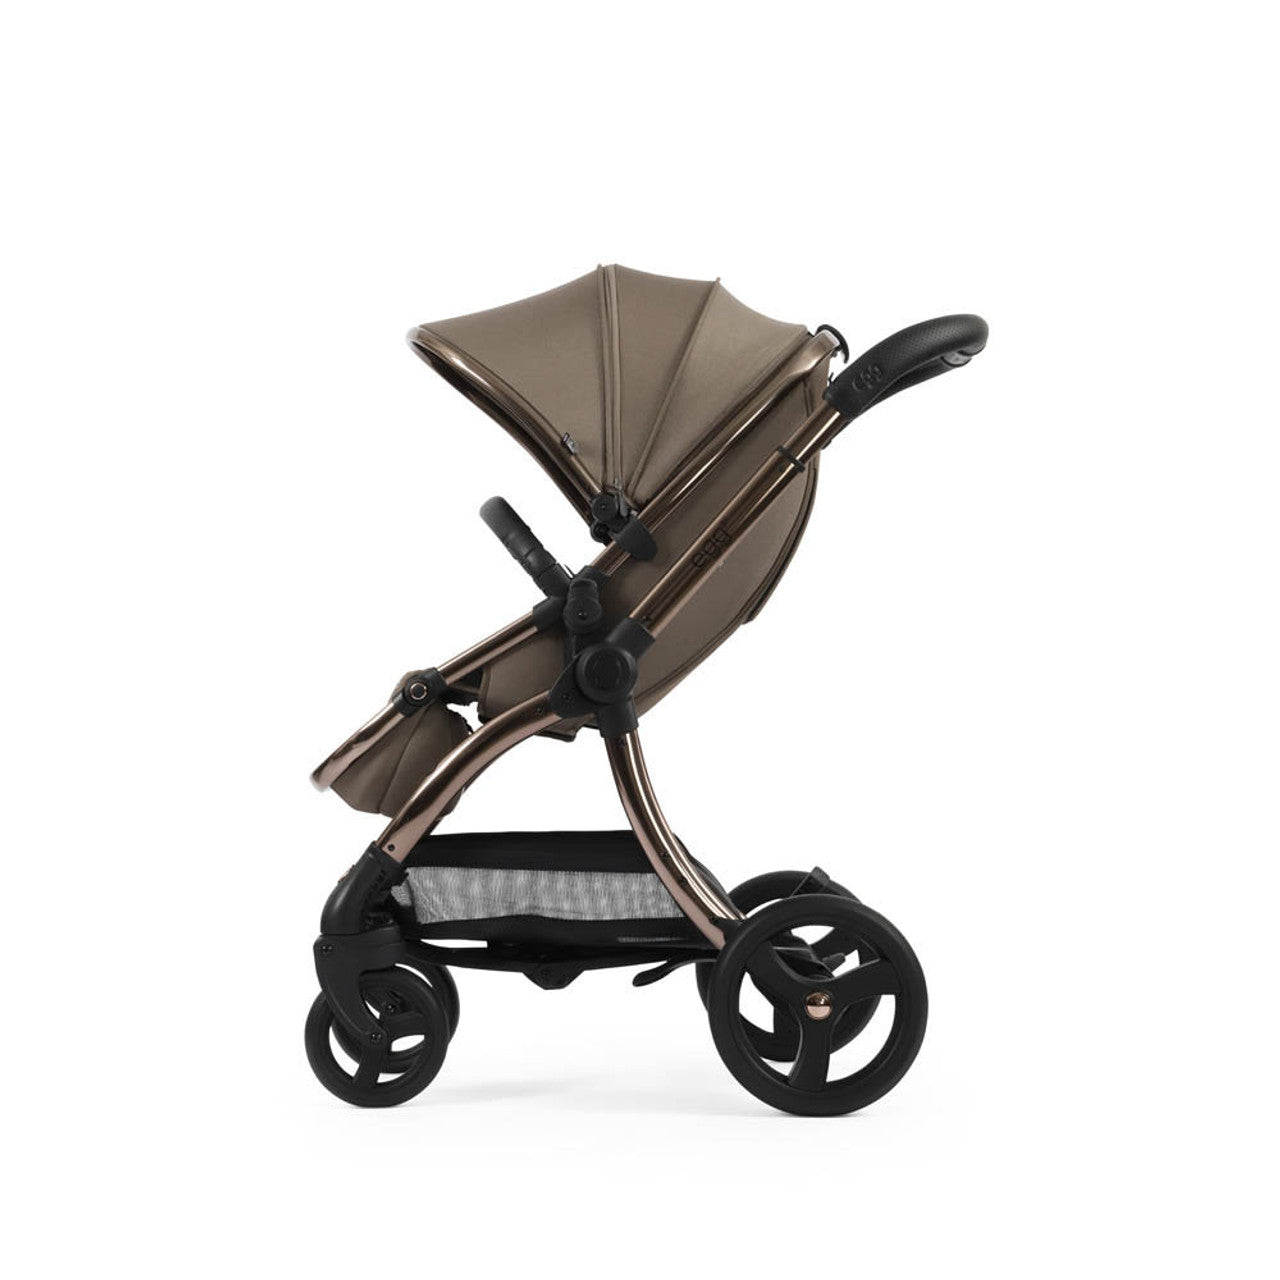 Egg® 3 Luxury Cloud T i-Size Travel System Bundle - Mink -  | For Your Little One